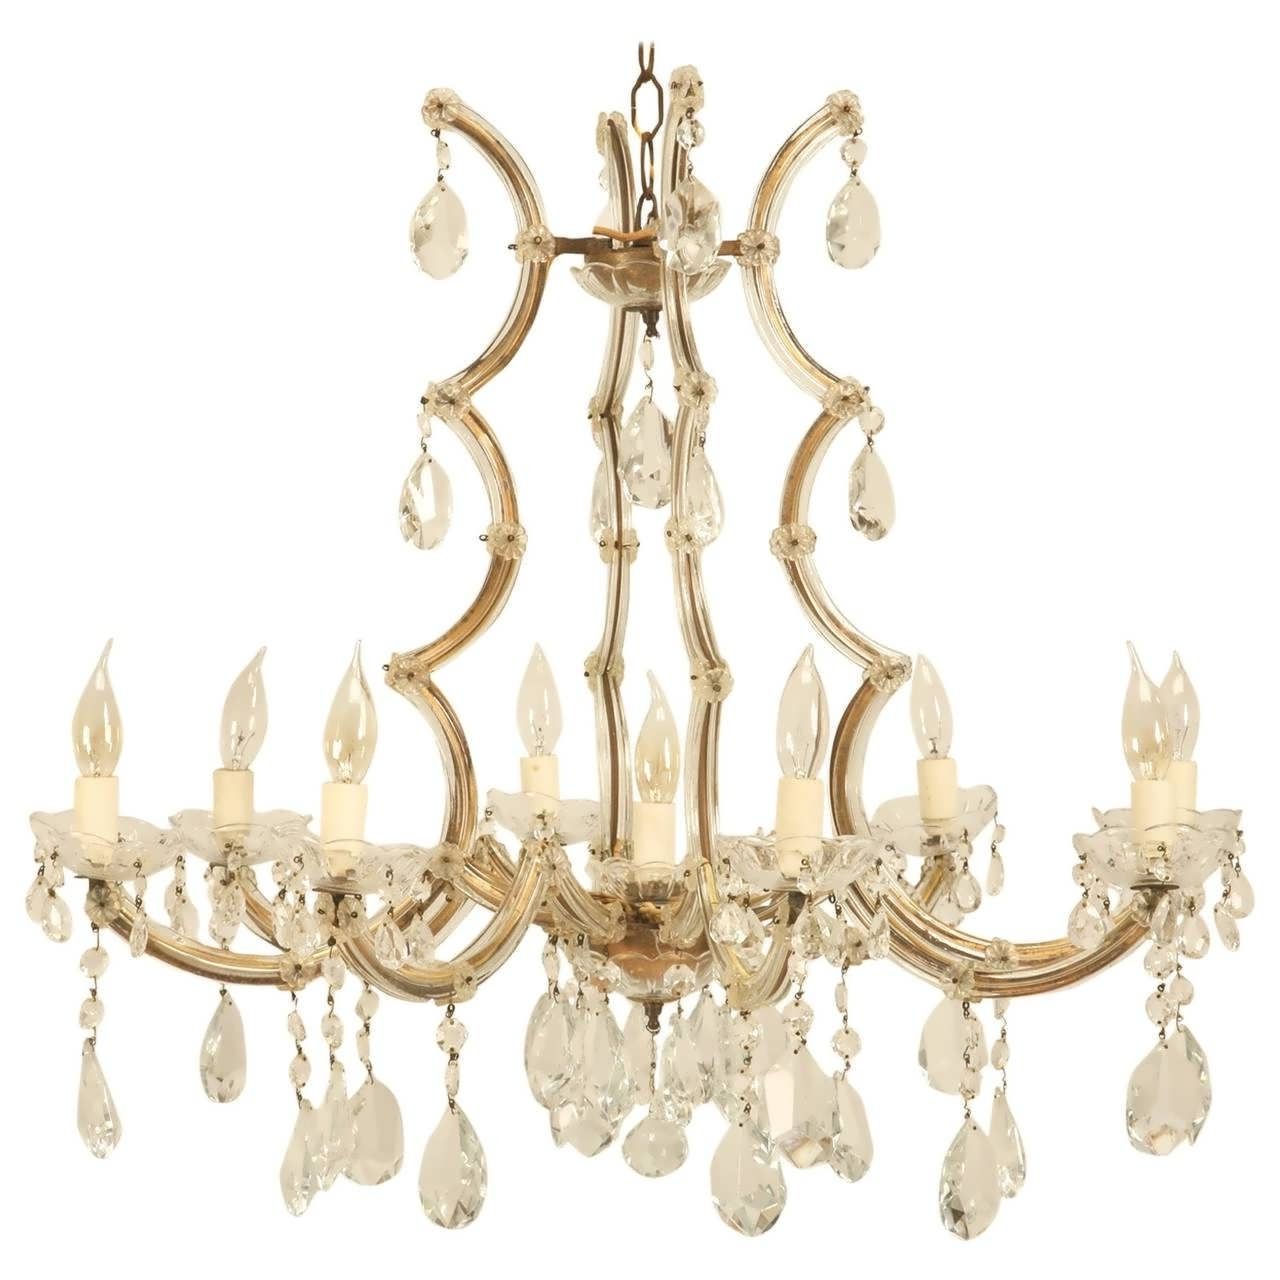 Preferred Turquoise Empire Chandeliers Throughout Chandeliers Design : Fabulous Elegant French Empire Chandeliers (View 14 of 20)